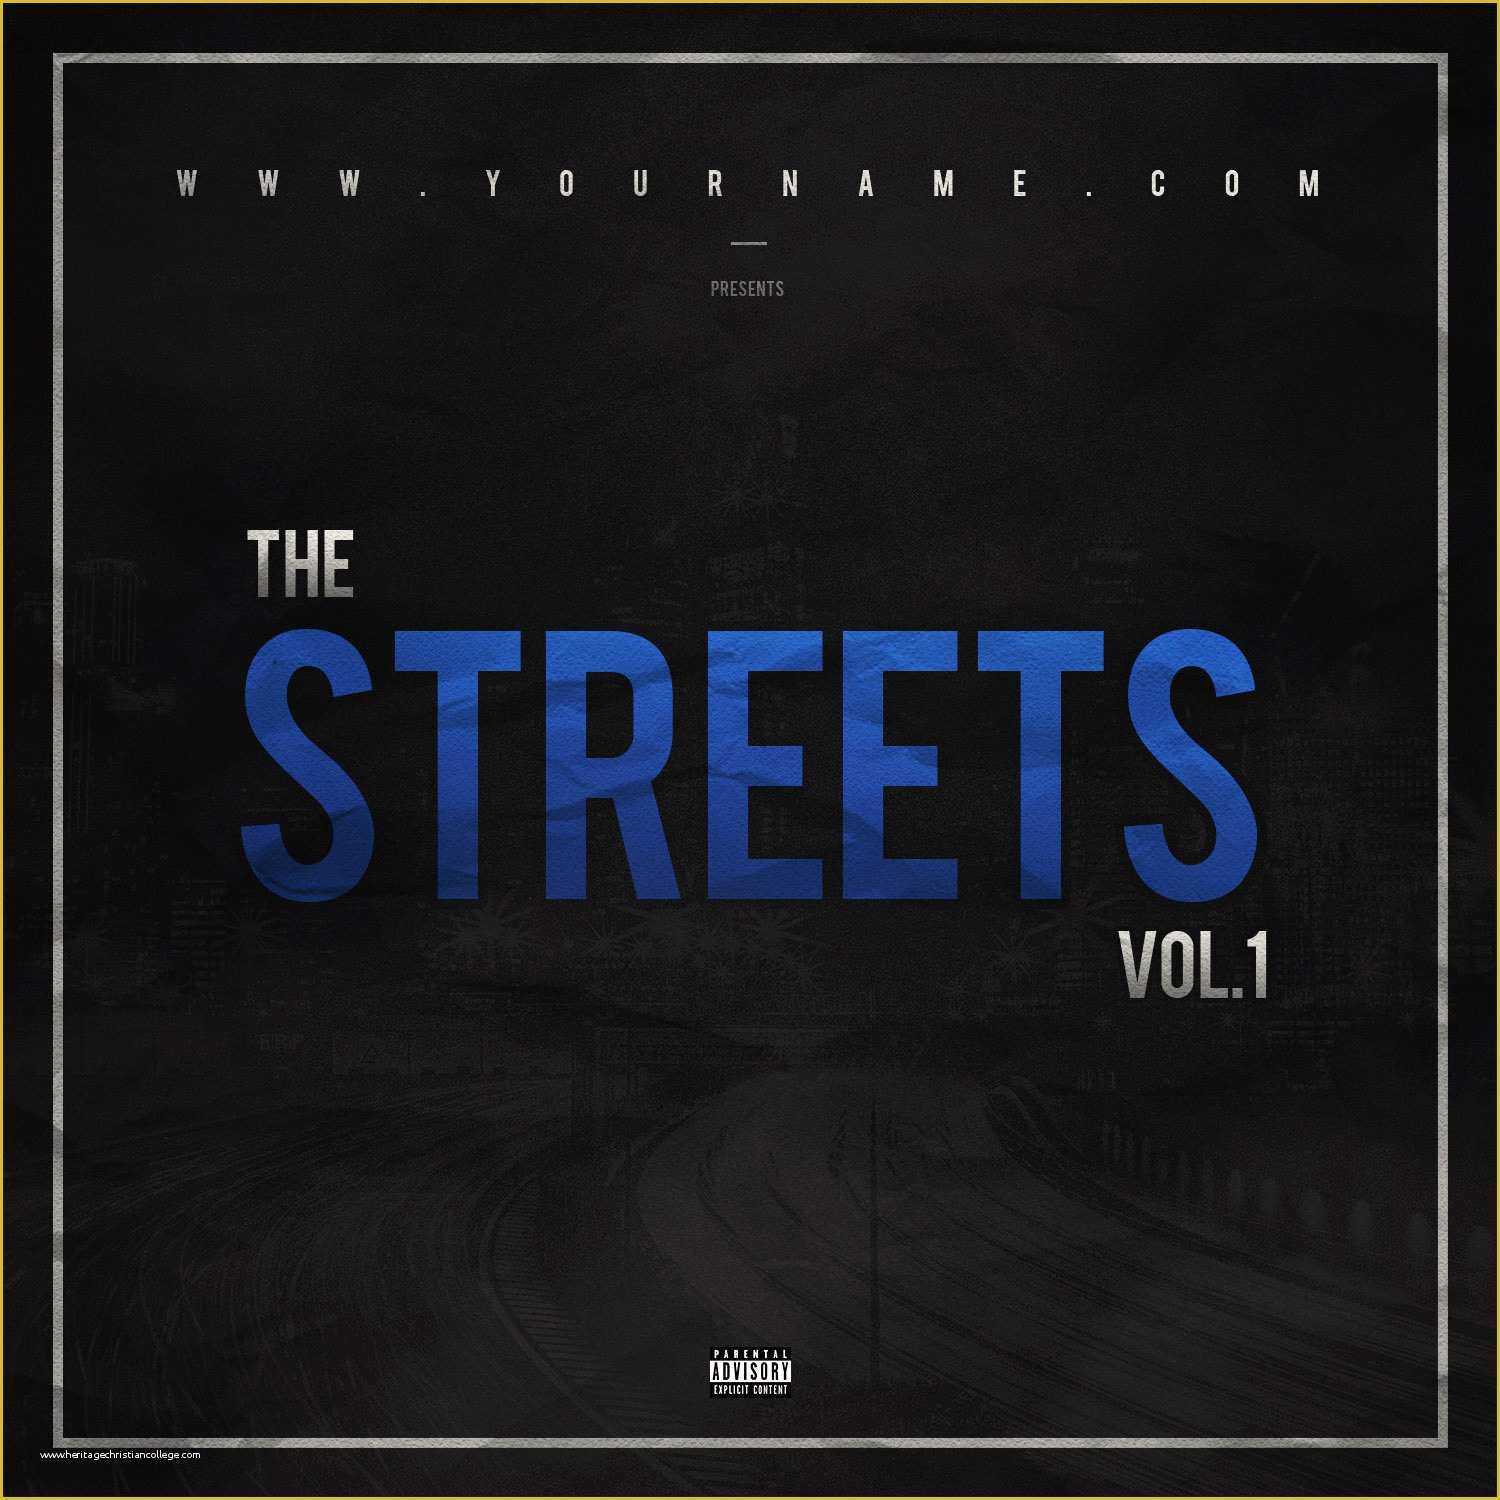 Free Mixtape Covers Templates Of Street Mixtape Cover Template Vms